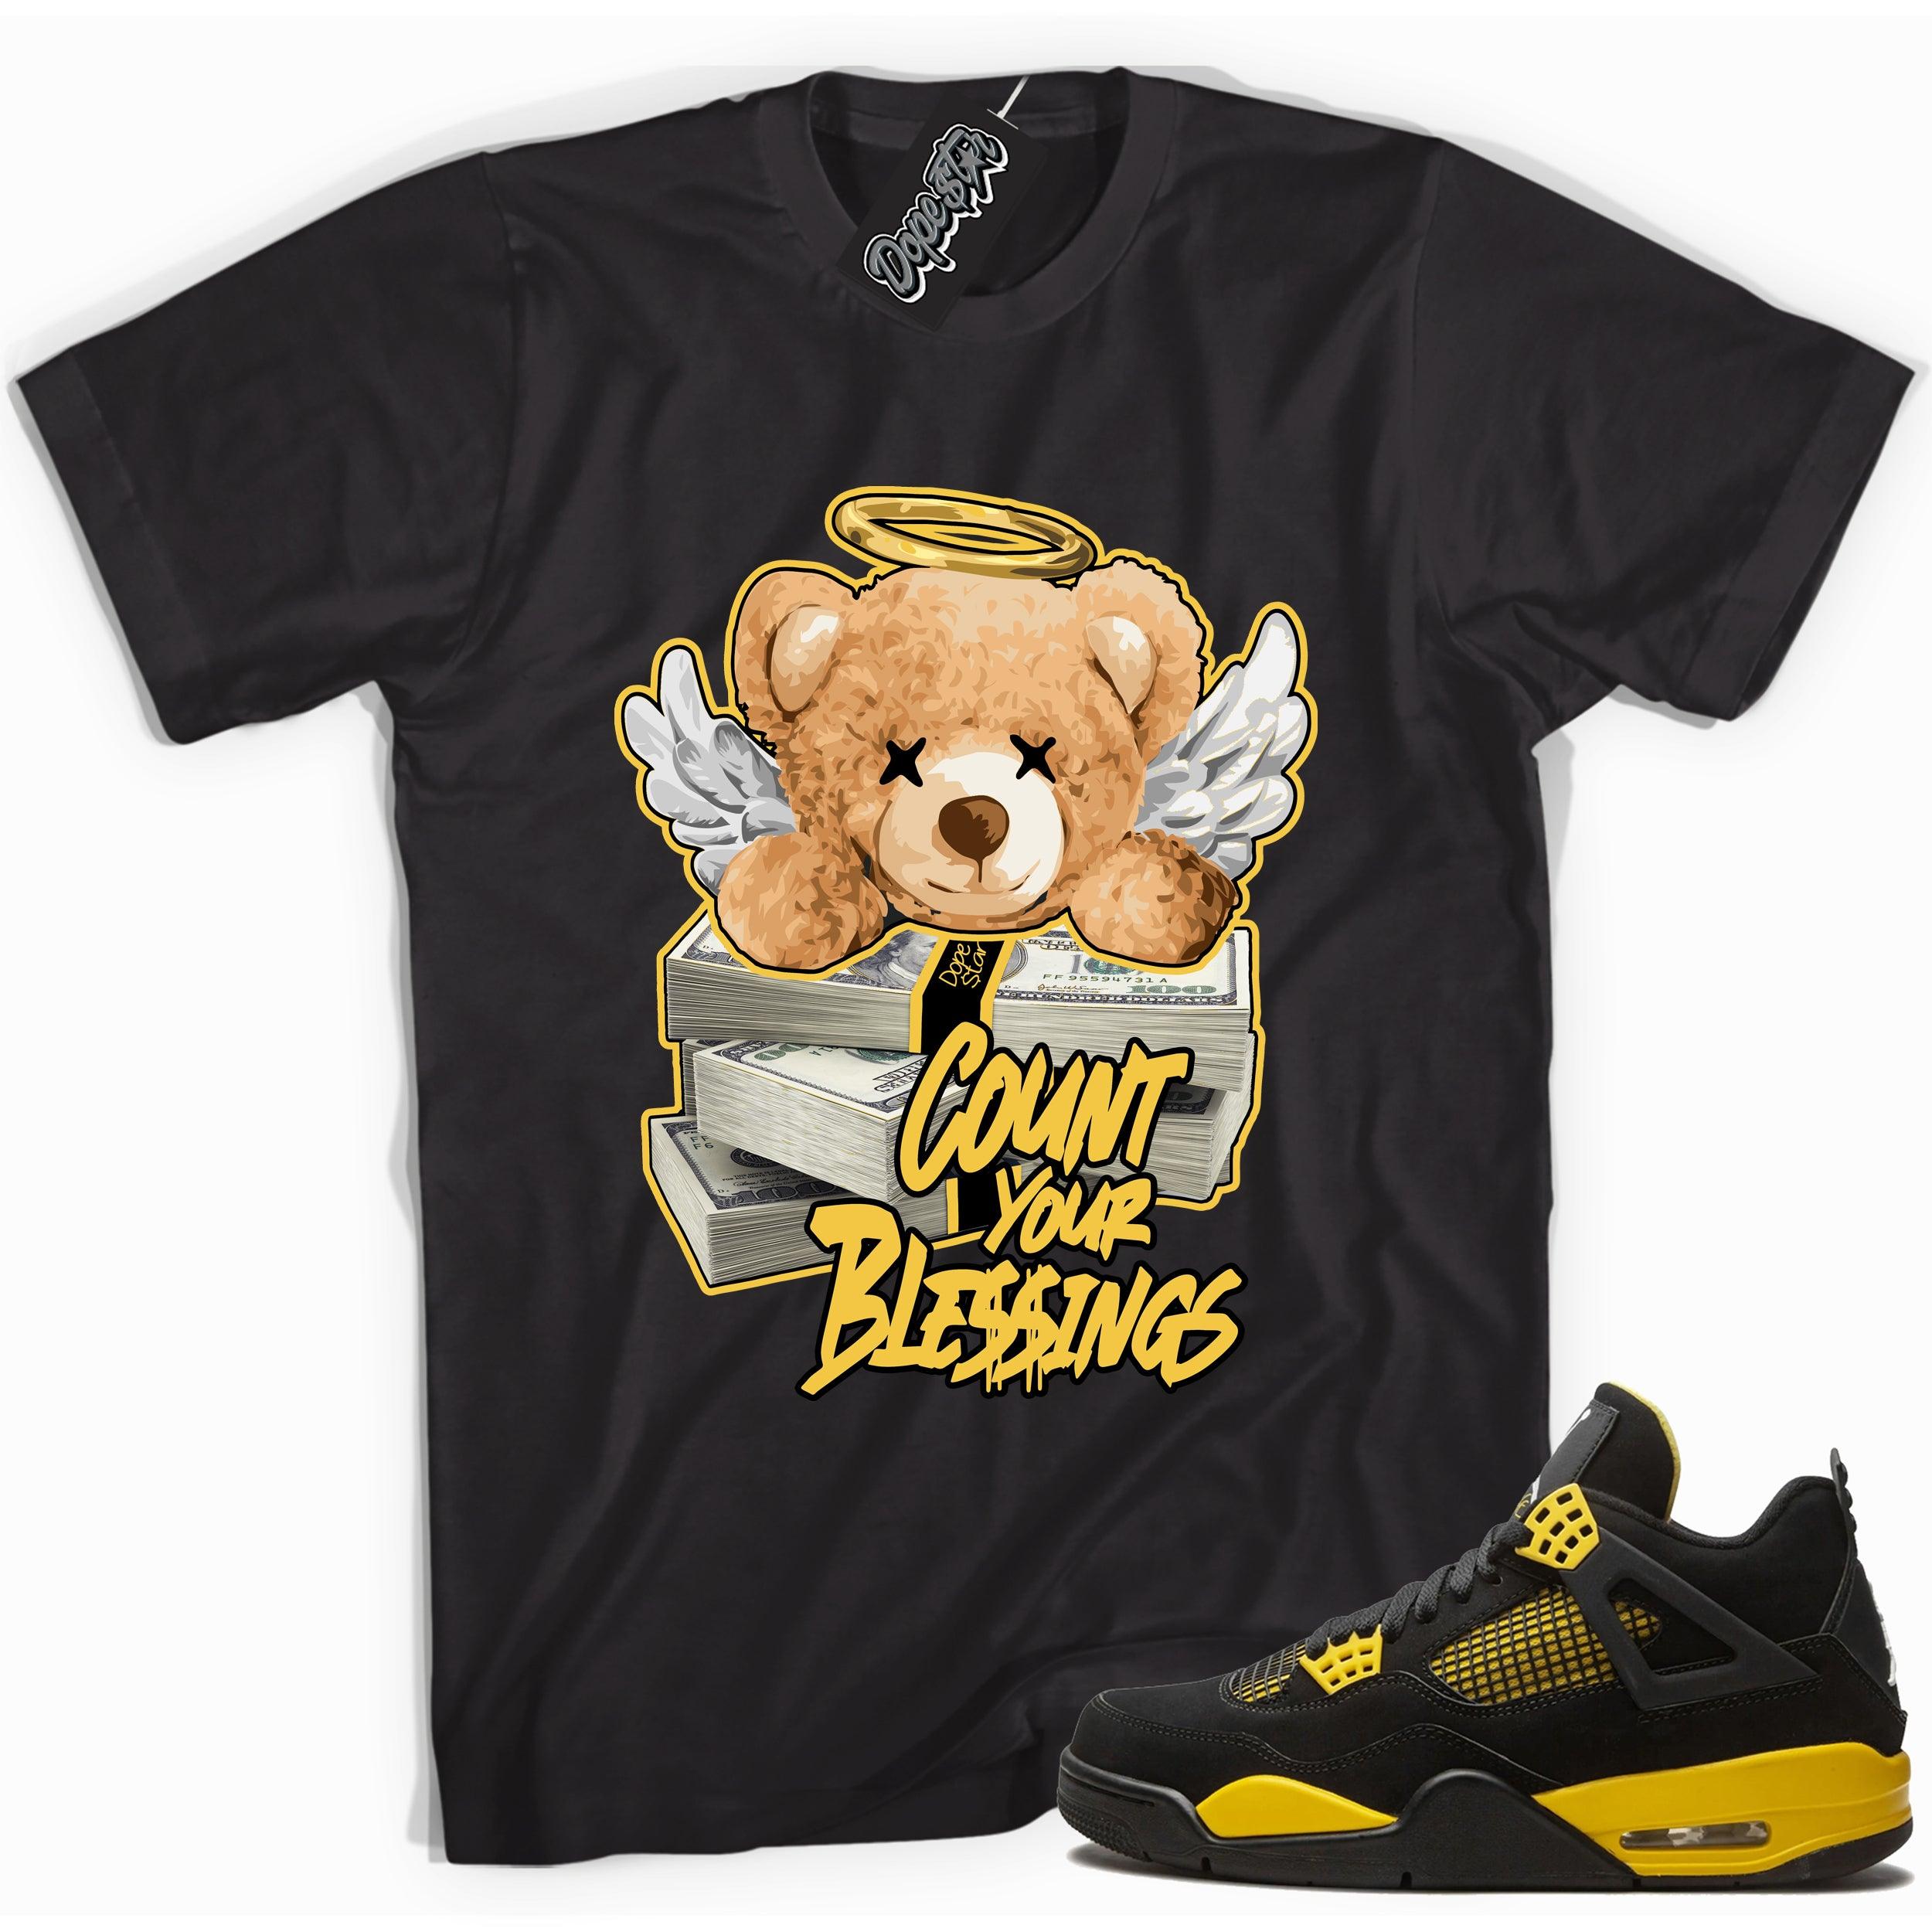 Cool black graphic tee with 'count your blessings' print, that perfectly matches  Air Jordan 4 Thunder sneakers